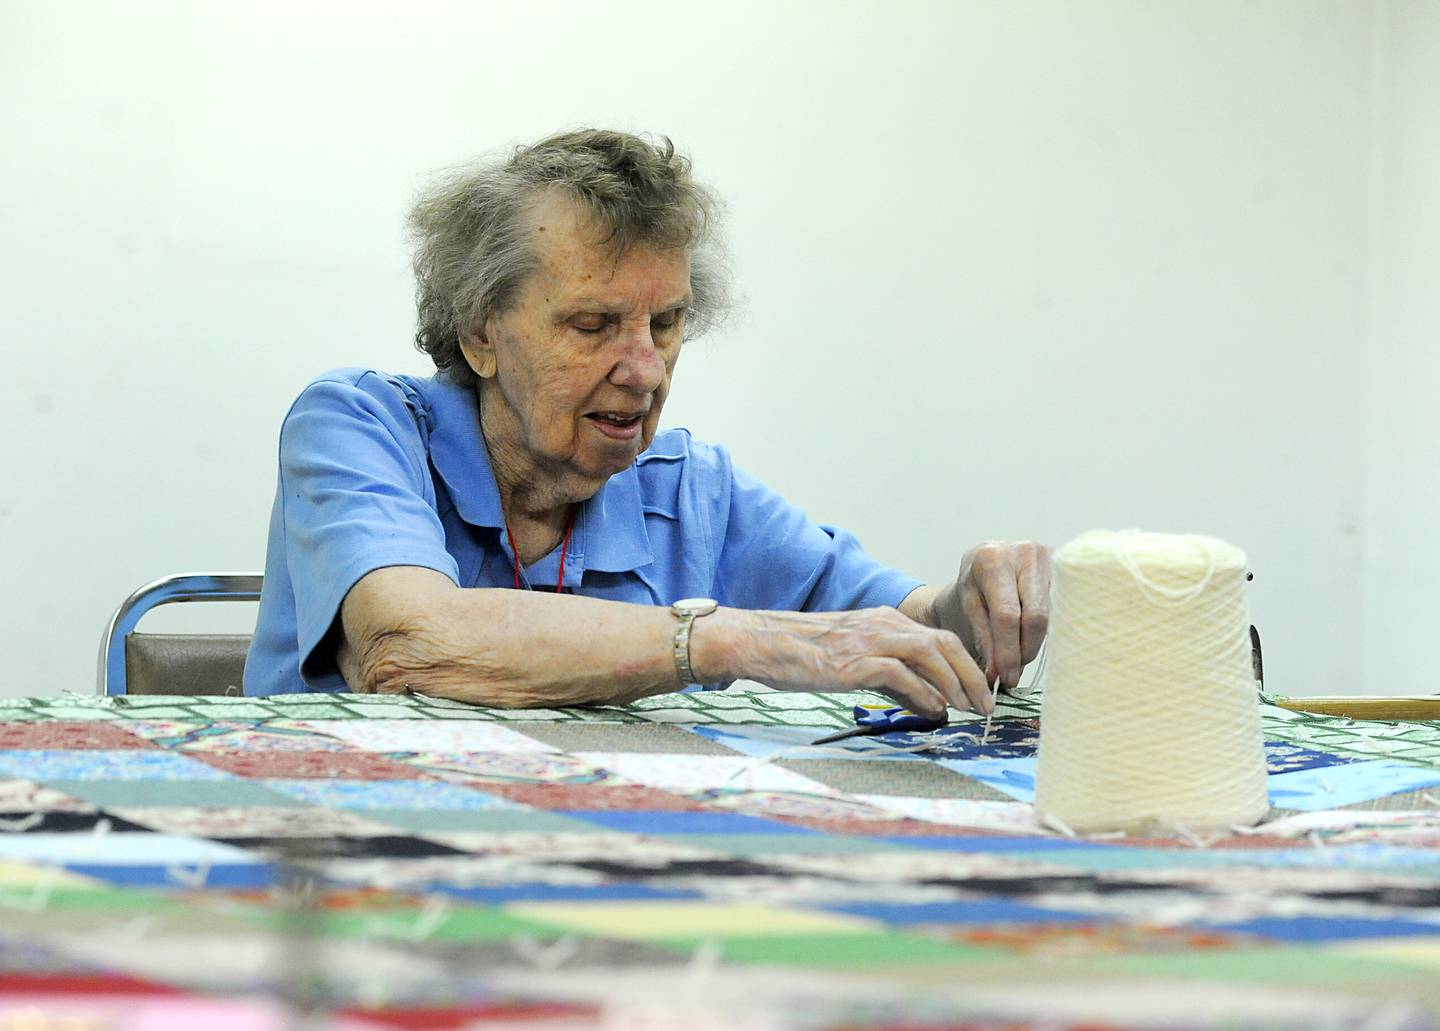 Maria Bremer stitches a quilt Wednesday, May 11, 2022, to send to Lutheran World Relief in the basement of Zion Evangelical Lutheran Church and School, 4206 W. Elm St. in McHenry. Since January, with the quilters now able to meet in person again, they have made 11 quilts for people in need.